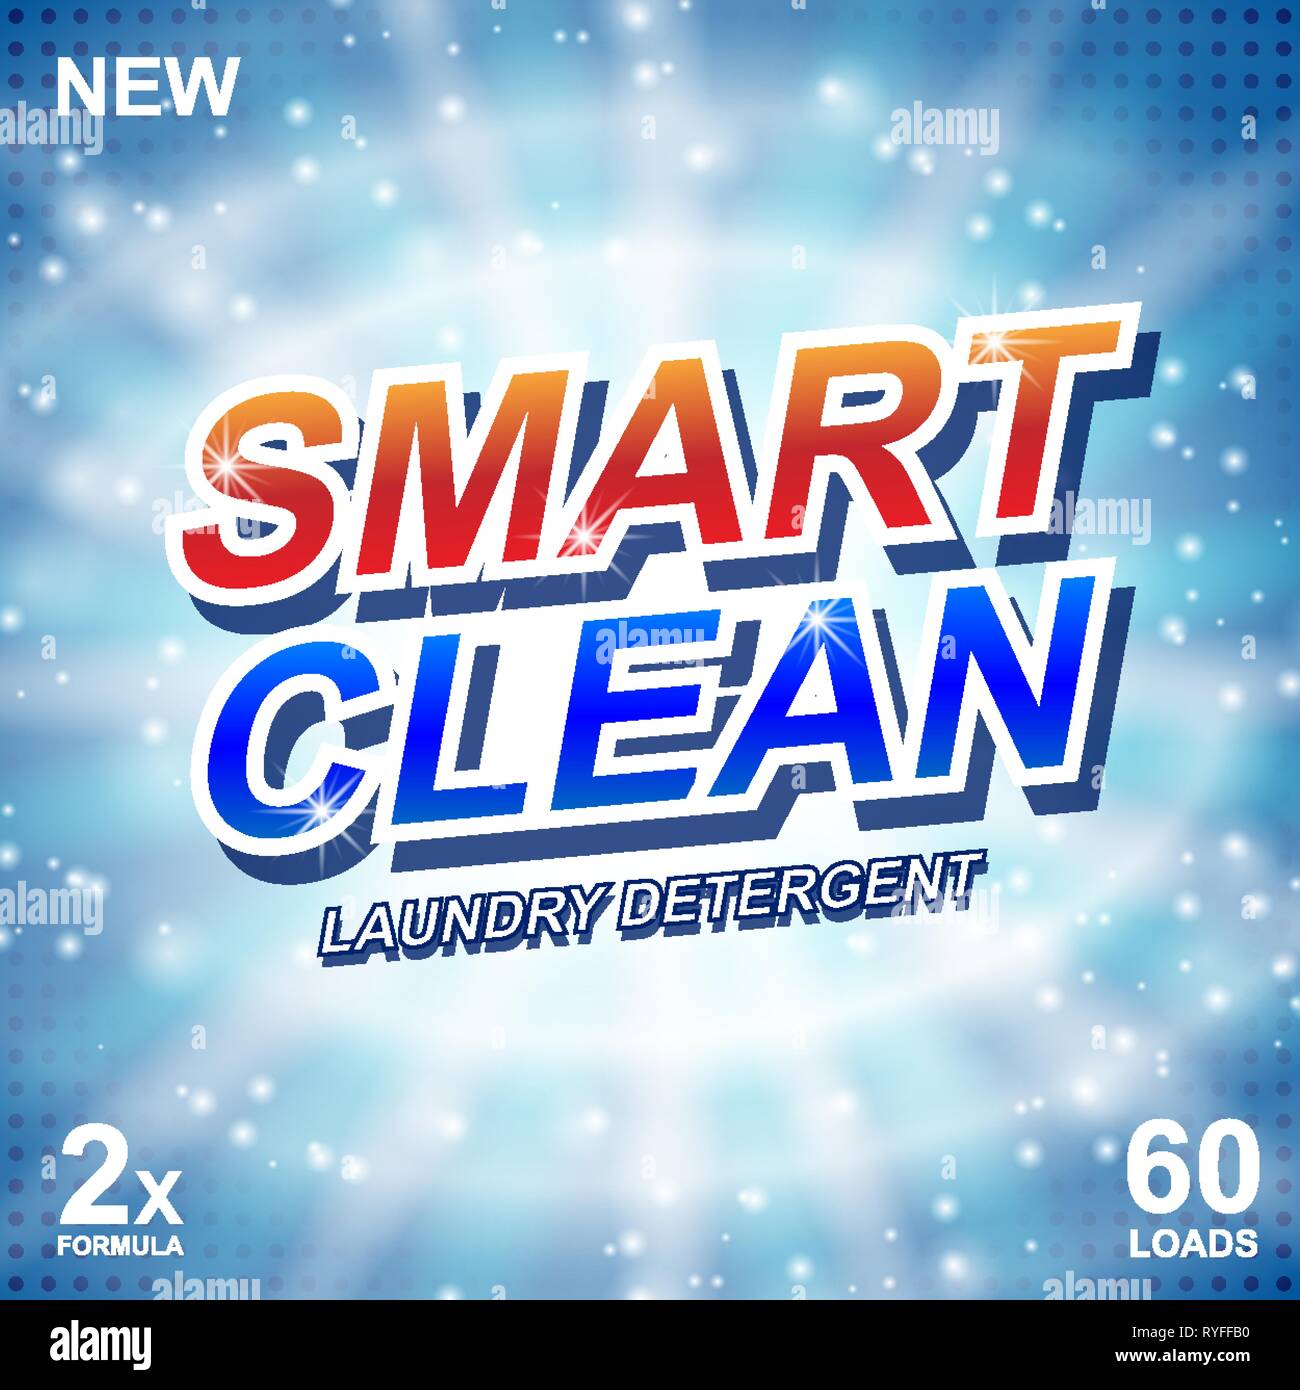 Smart clean soap banner ads design. Laundry detergent fresh clean Template. Washing Powder or Liquid Detergents Package design. Vector illustration Stock Vector